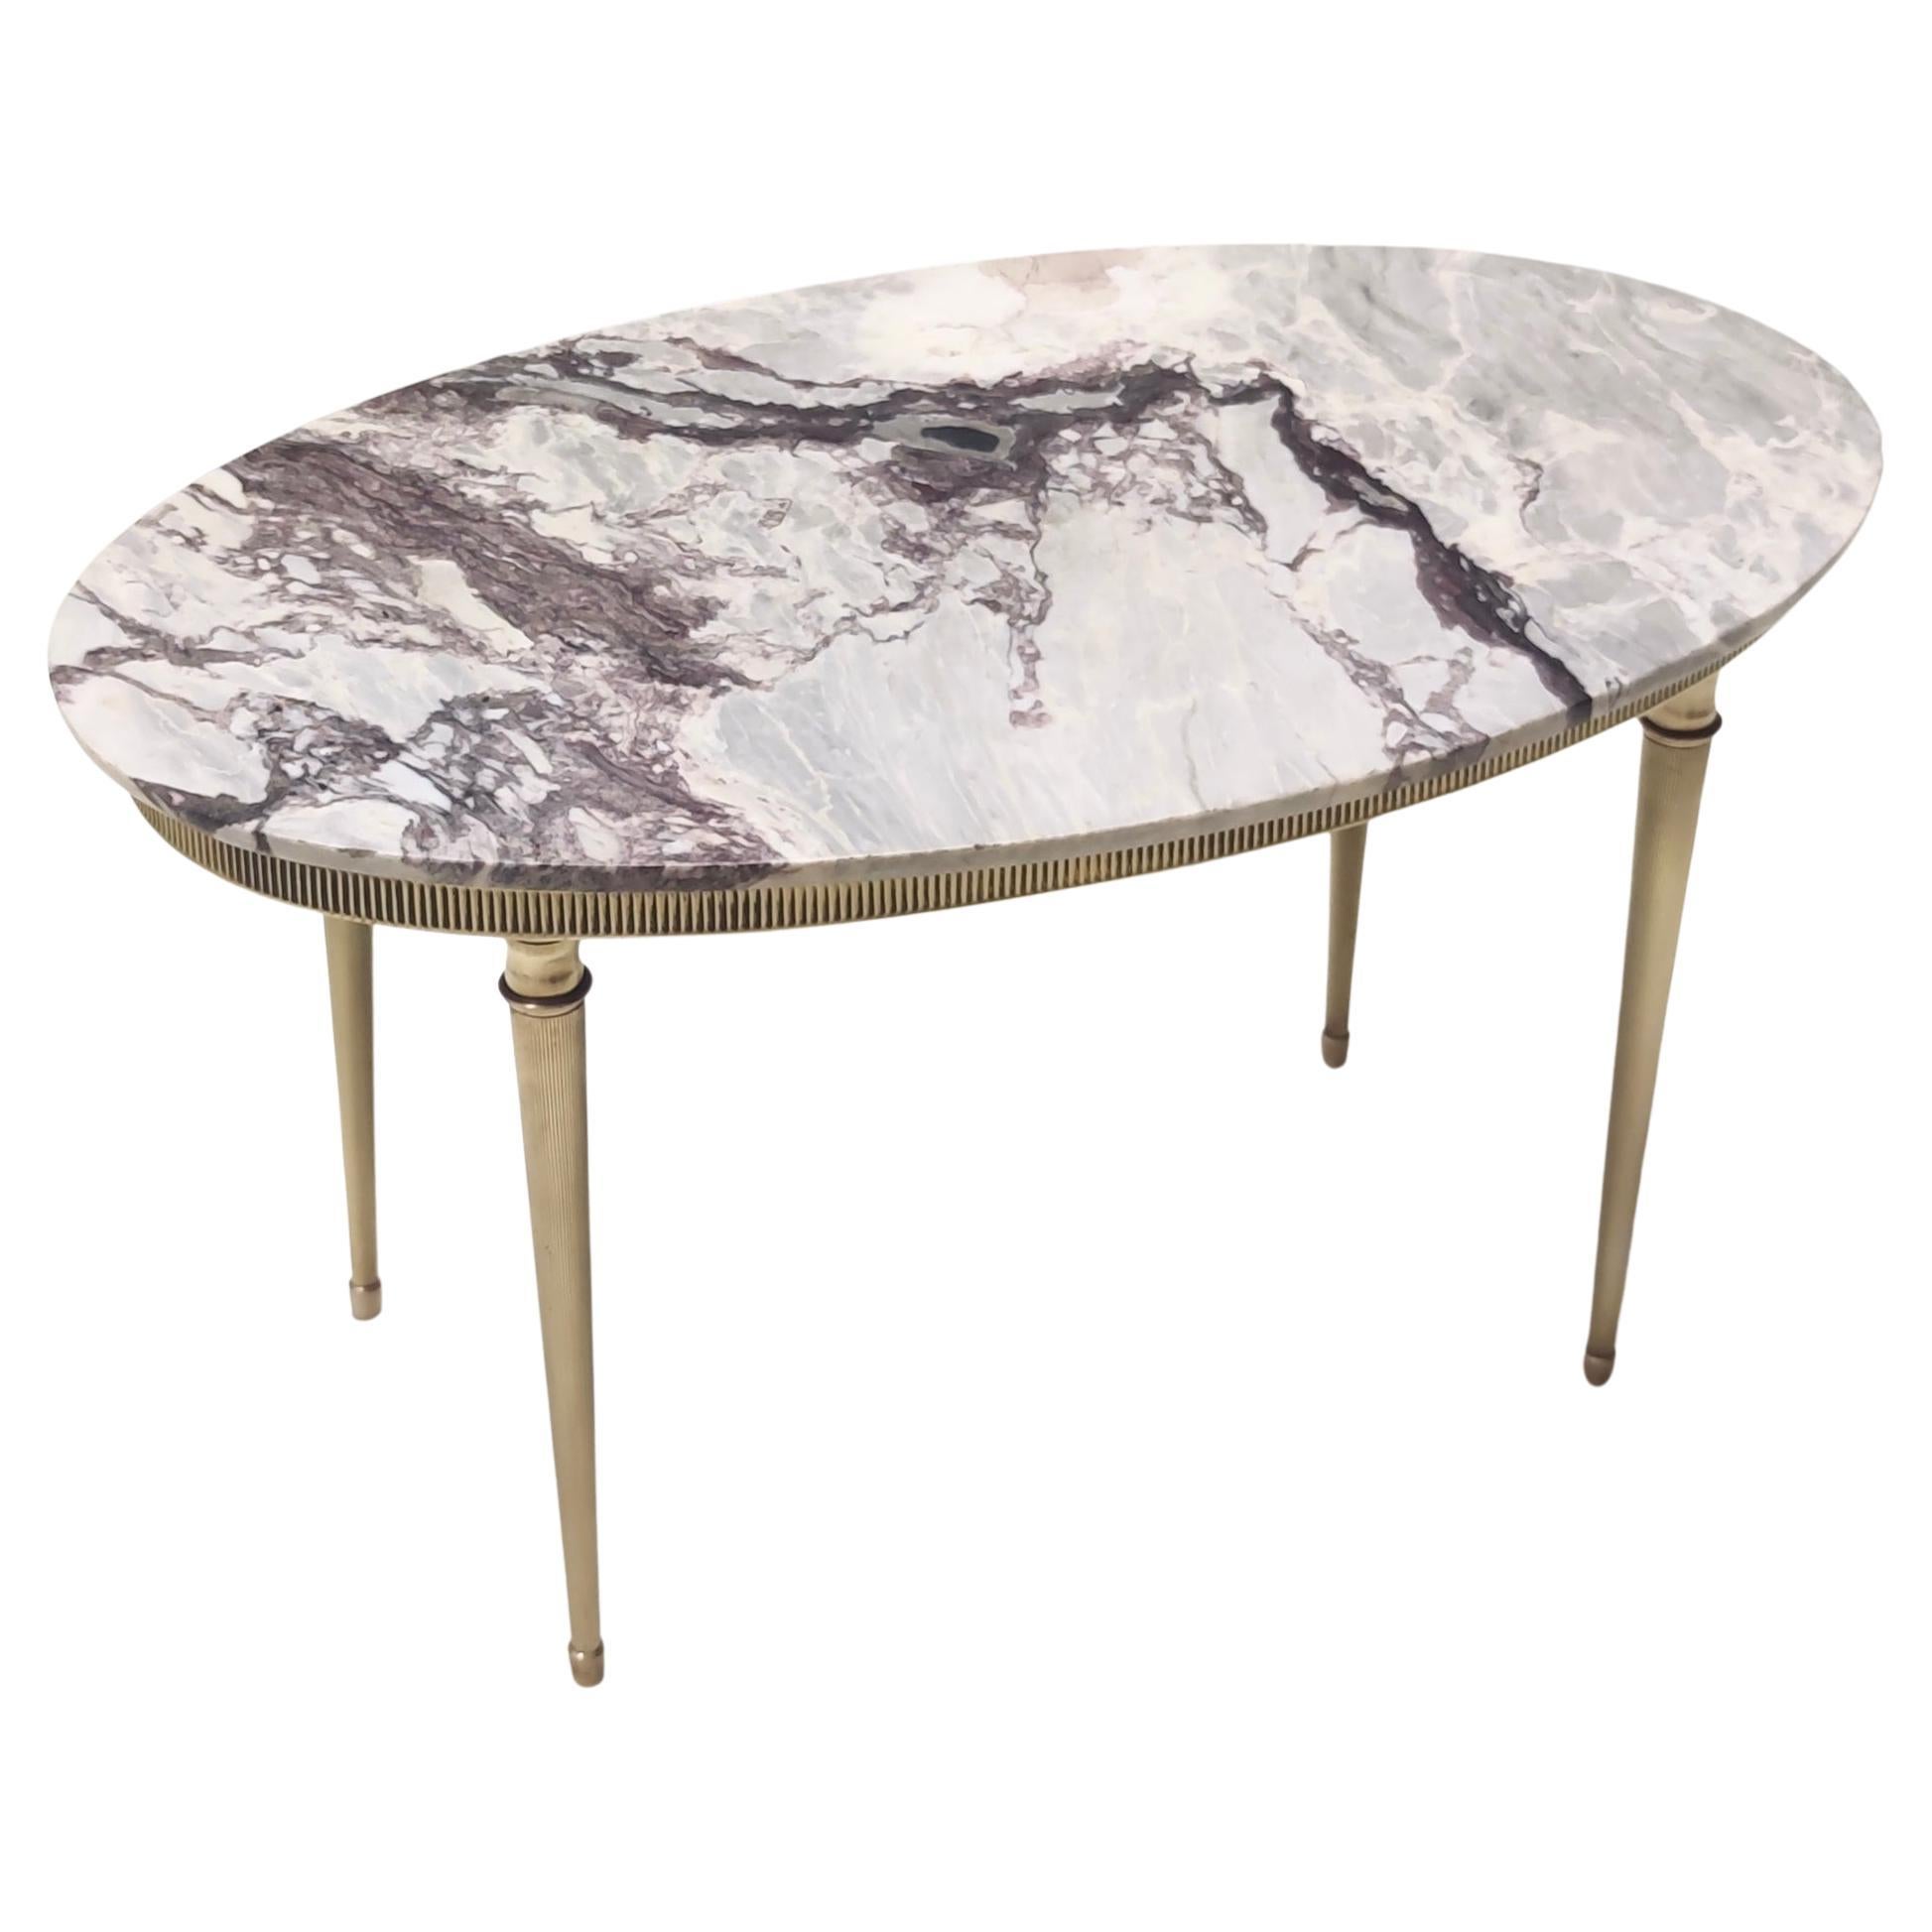 Vintage Oval Coffee Table with Brass Frame and Calacatta Viola Marble Top, Italy